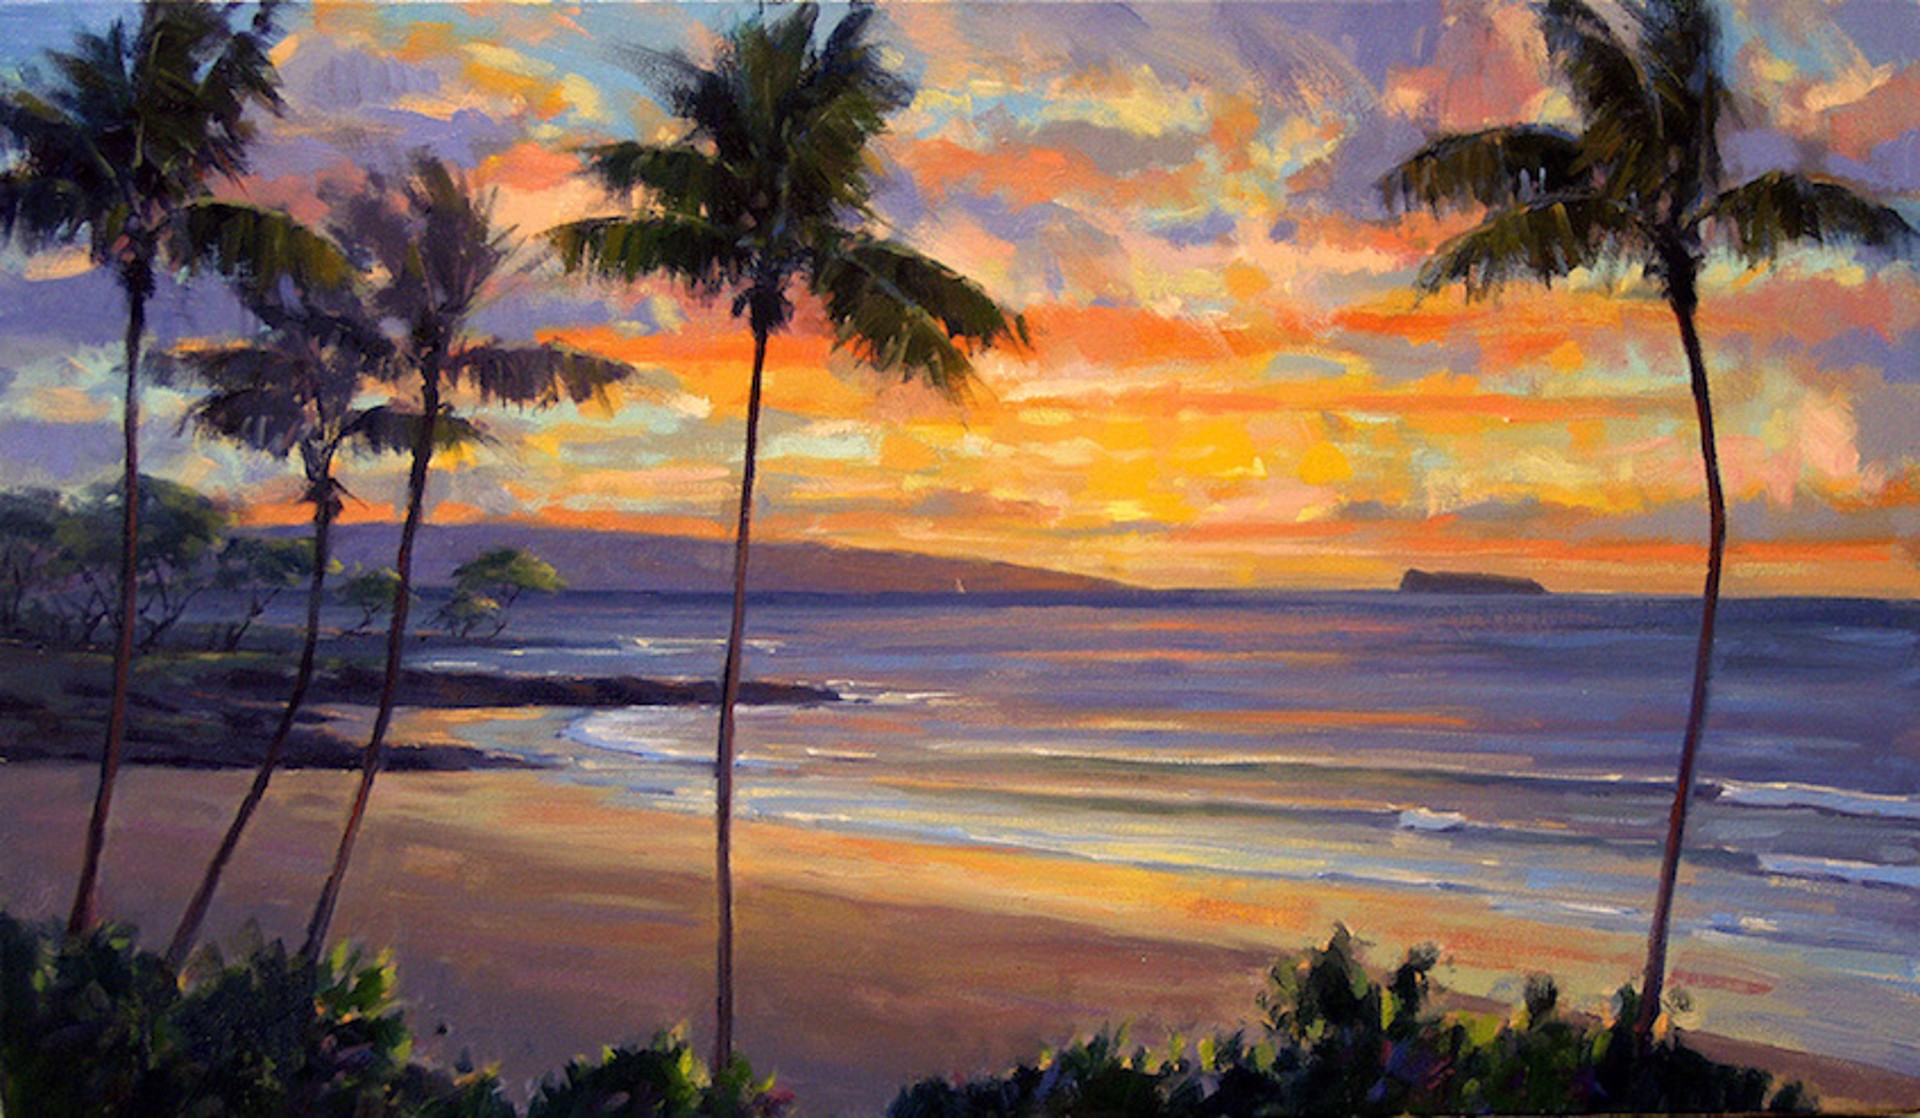 Wailea Sunset Peace - SOLD by Commission Possibilities / Previously Sold ZX